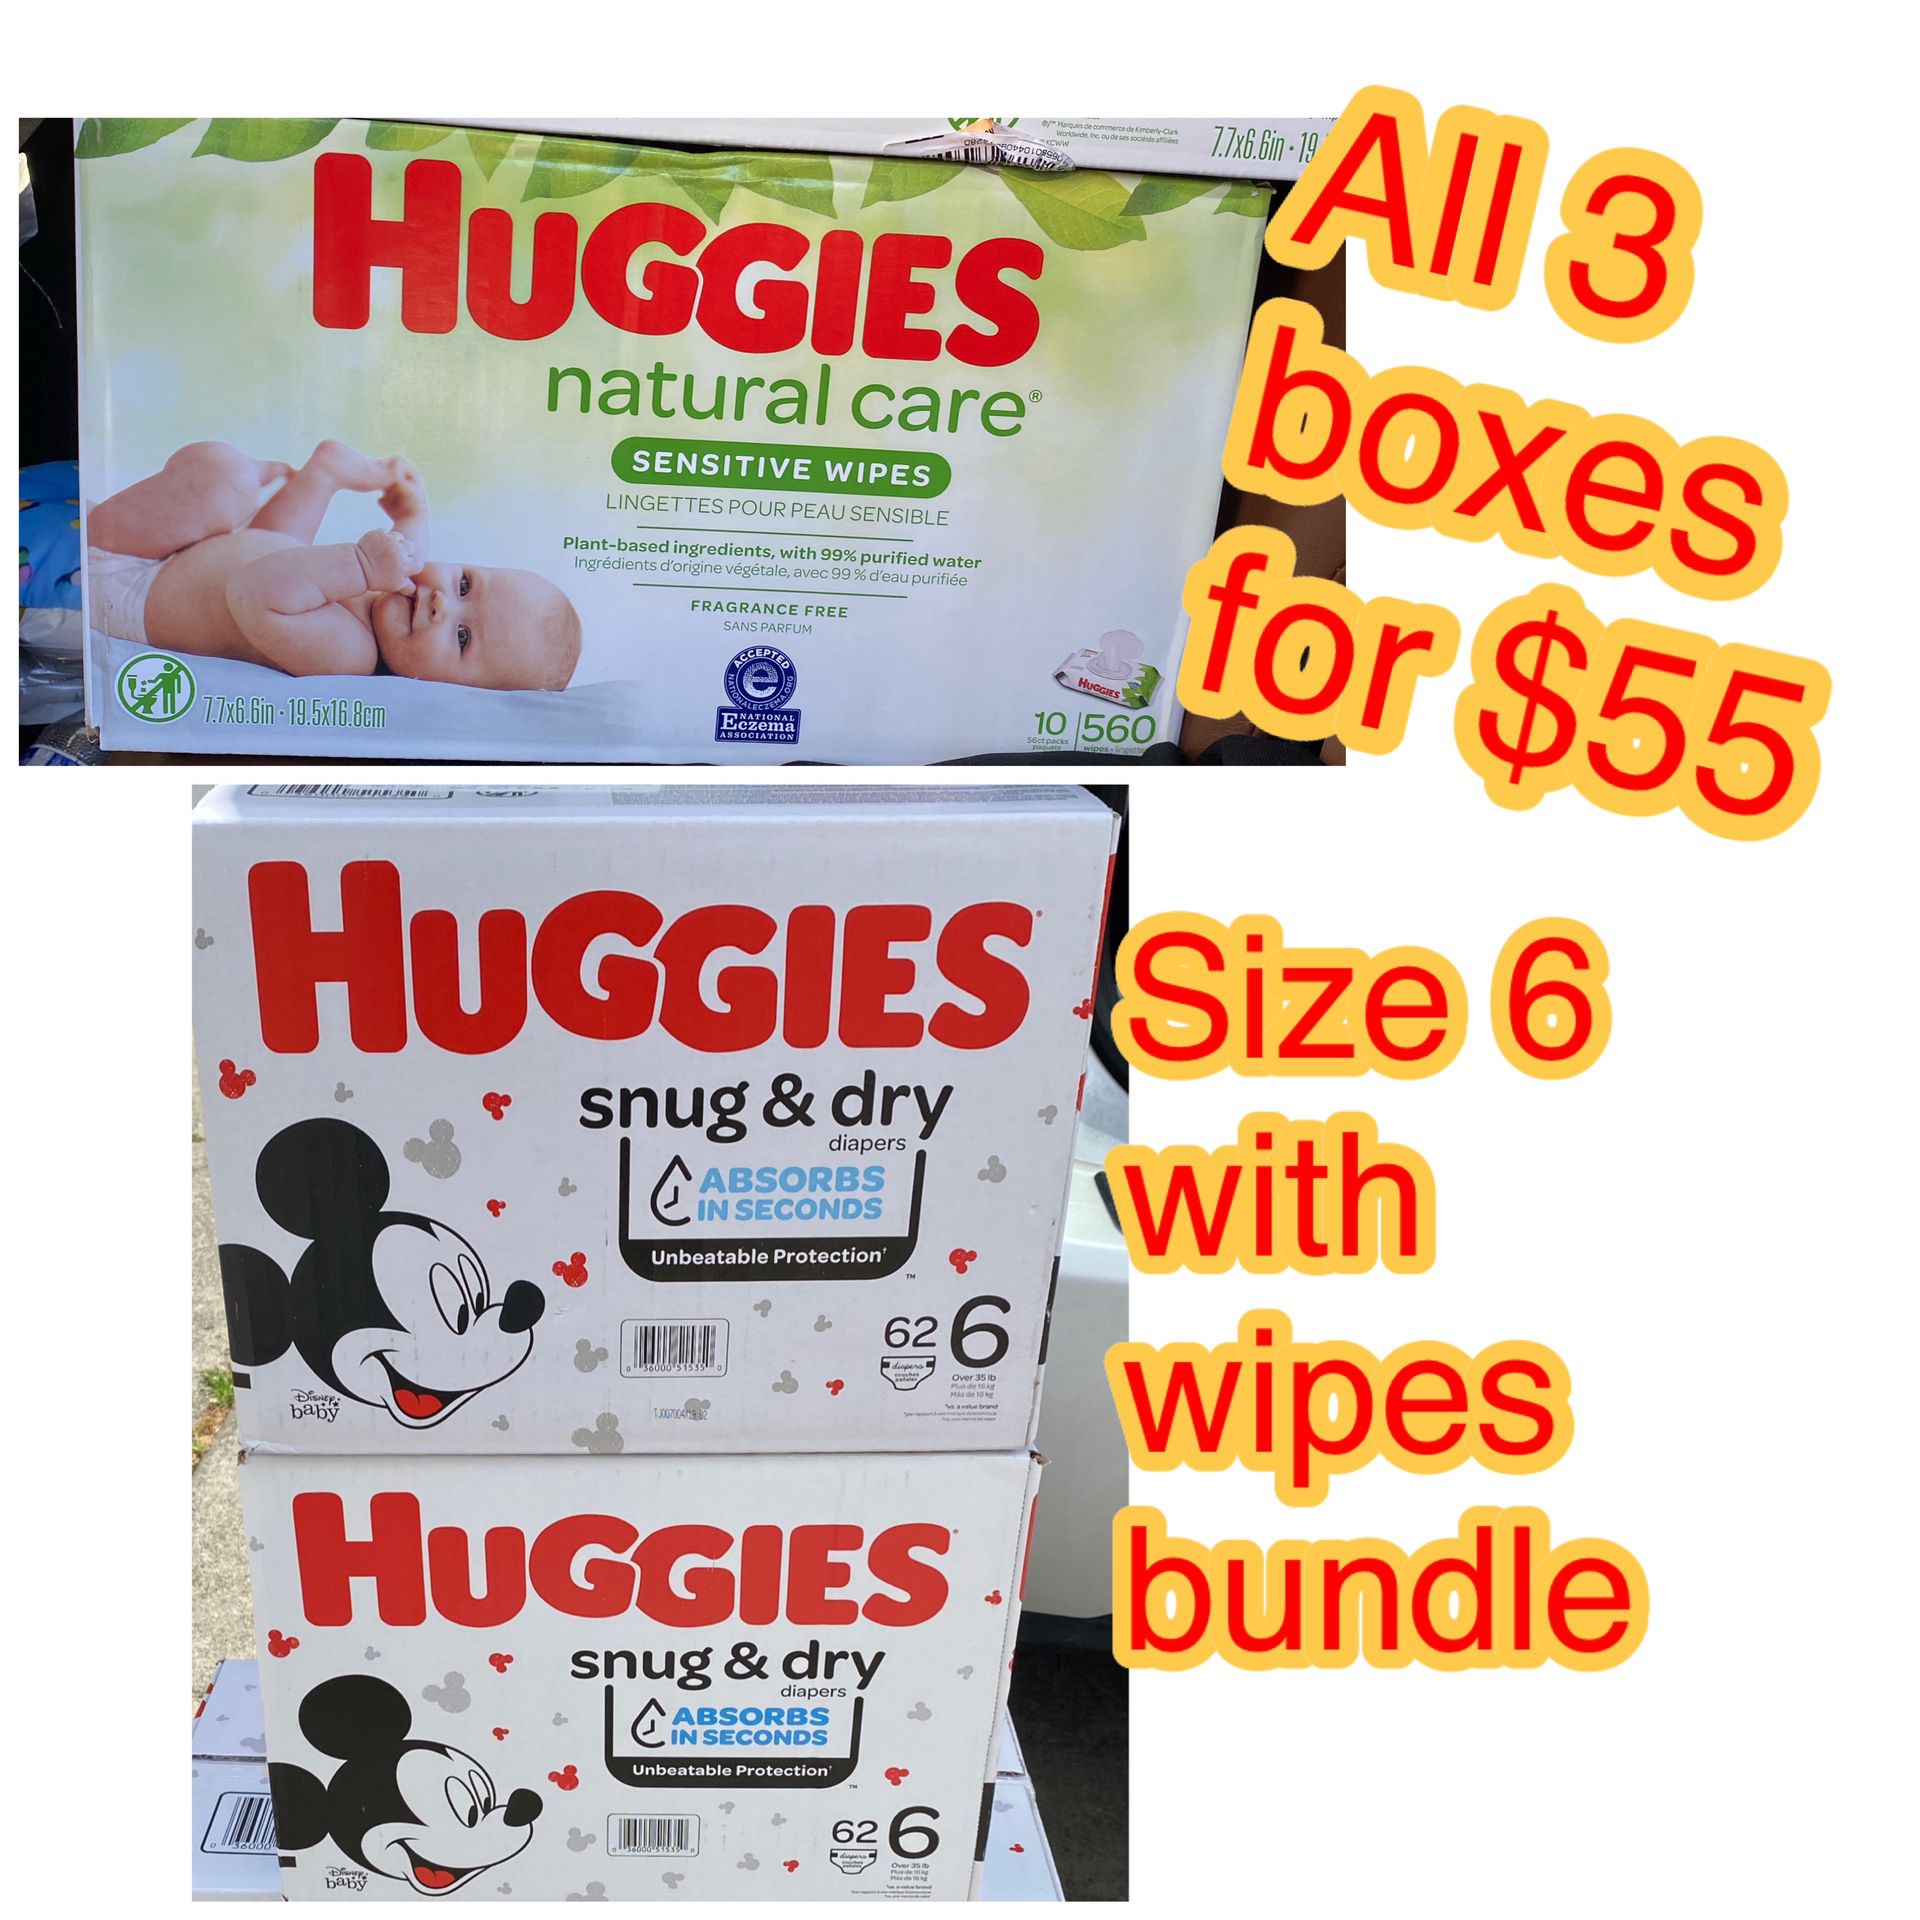 huggies size 6 diapers with wipes bundle